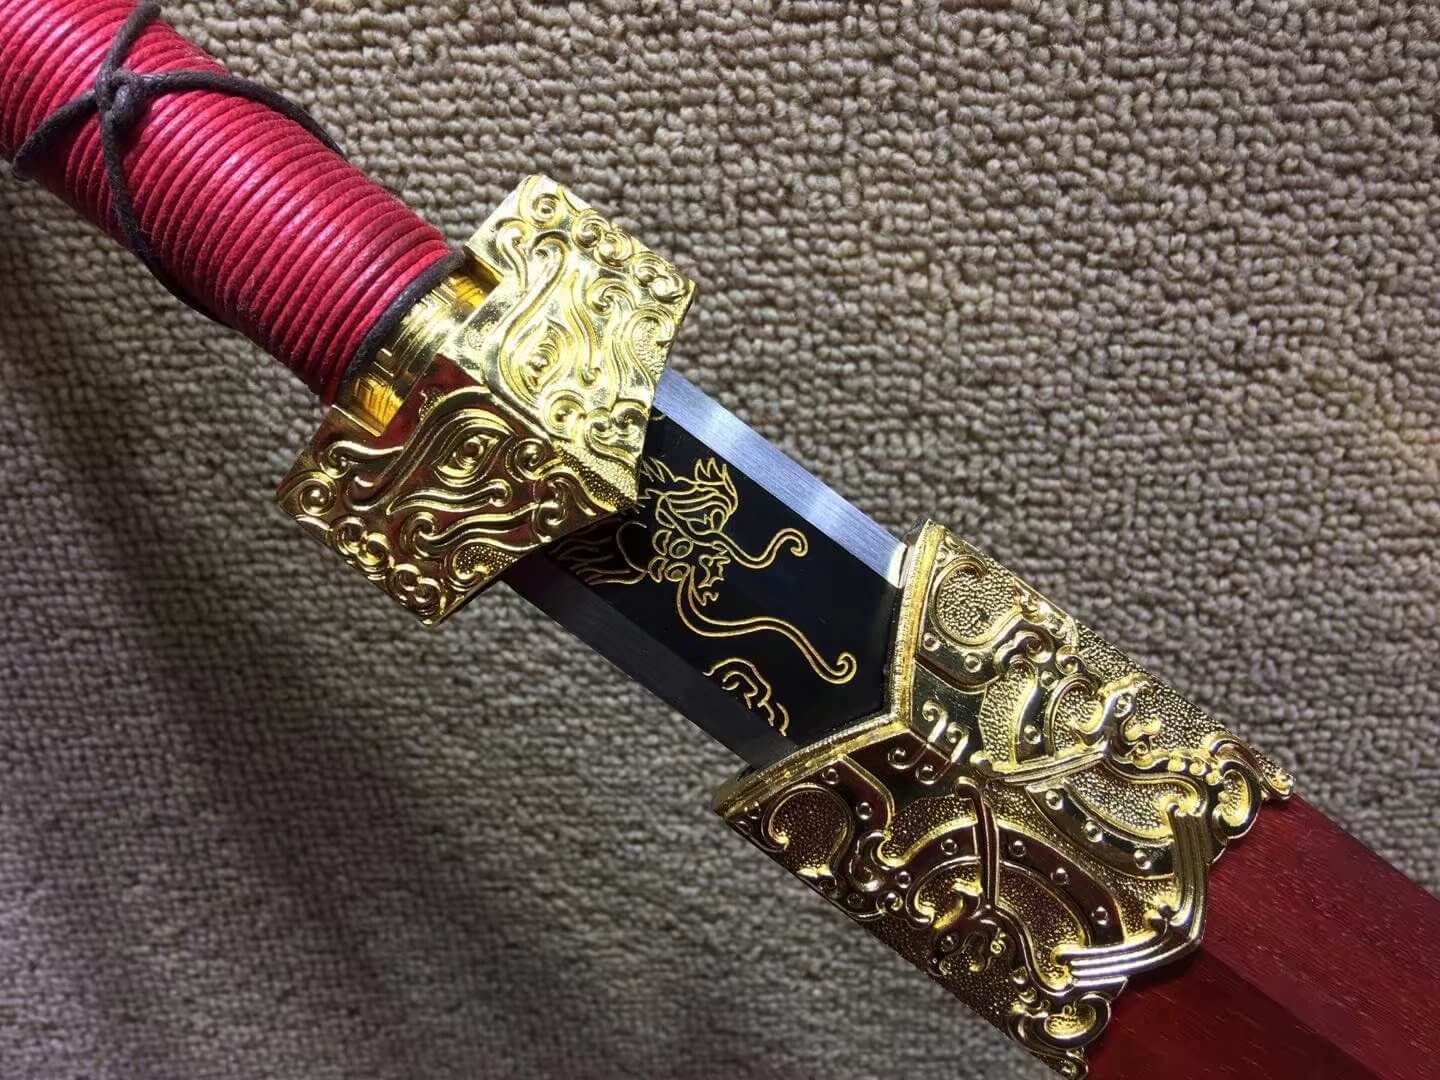 Han jian,High carbon steel blade,Red scabbard,Alloy fitting - Chinese sword shop